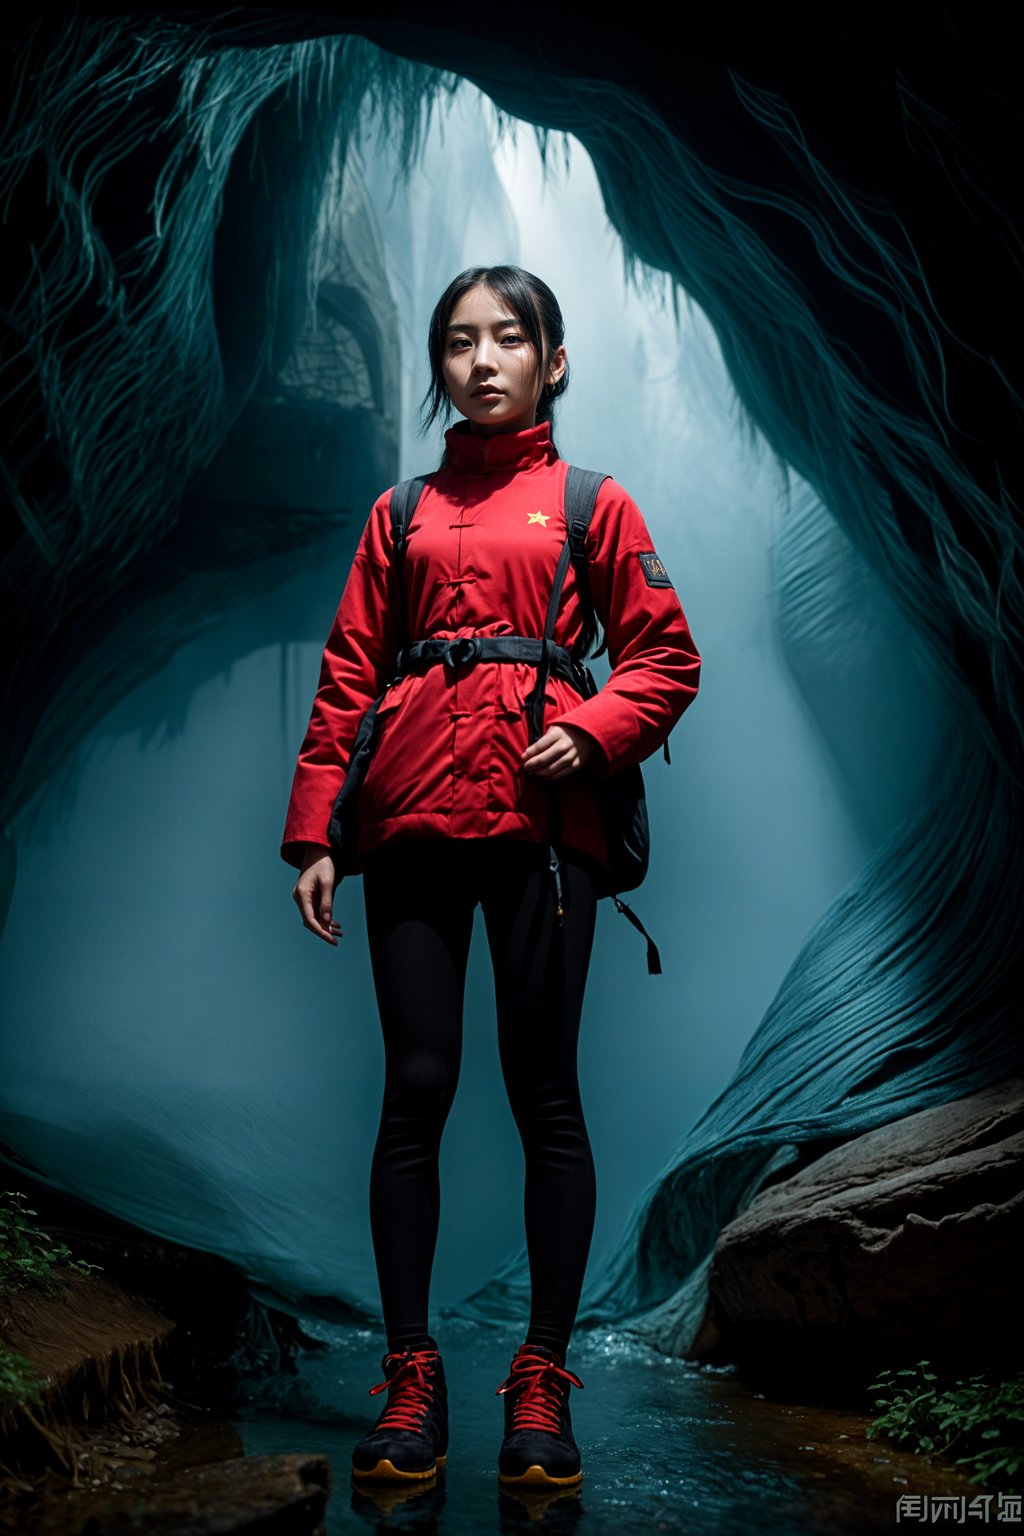 woman as individual hiking through an impressive cave system